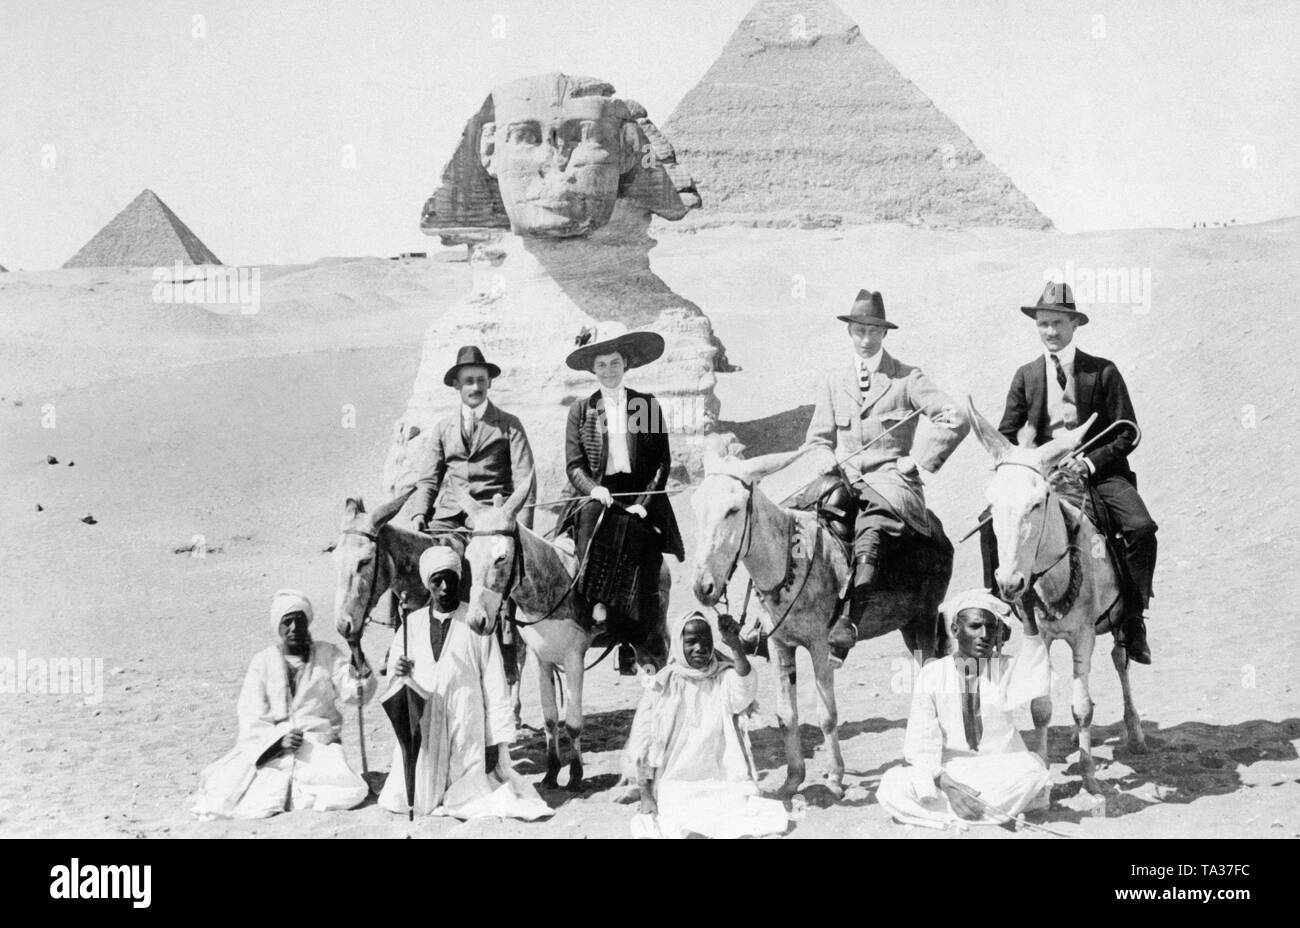 The German Crown Prince William, the eldest son of Emperor William II, and his wife Cecilia pose on donkeys in front of the Sphinx in Giza, in the background the pyramids. A trip to Egypt was considered an expensive and extravagant adventure at that time. Stock Photo